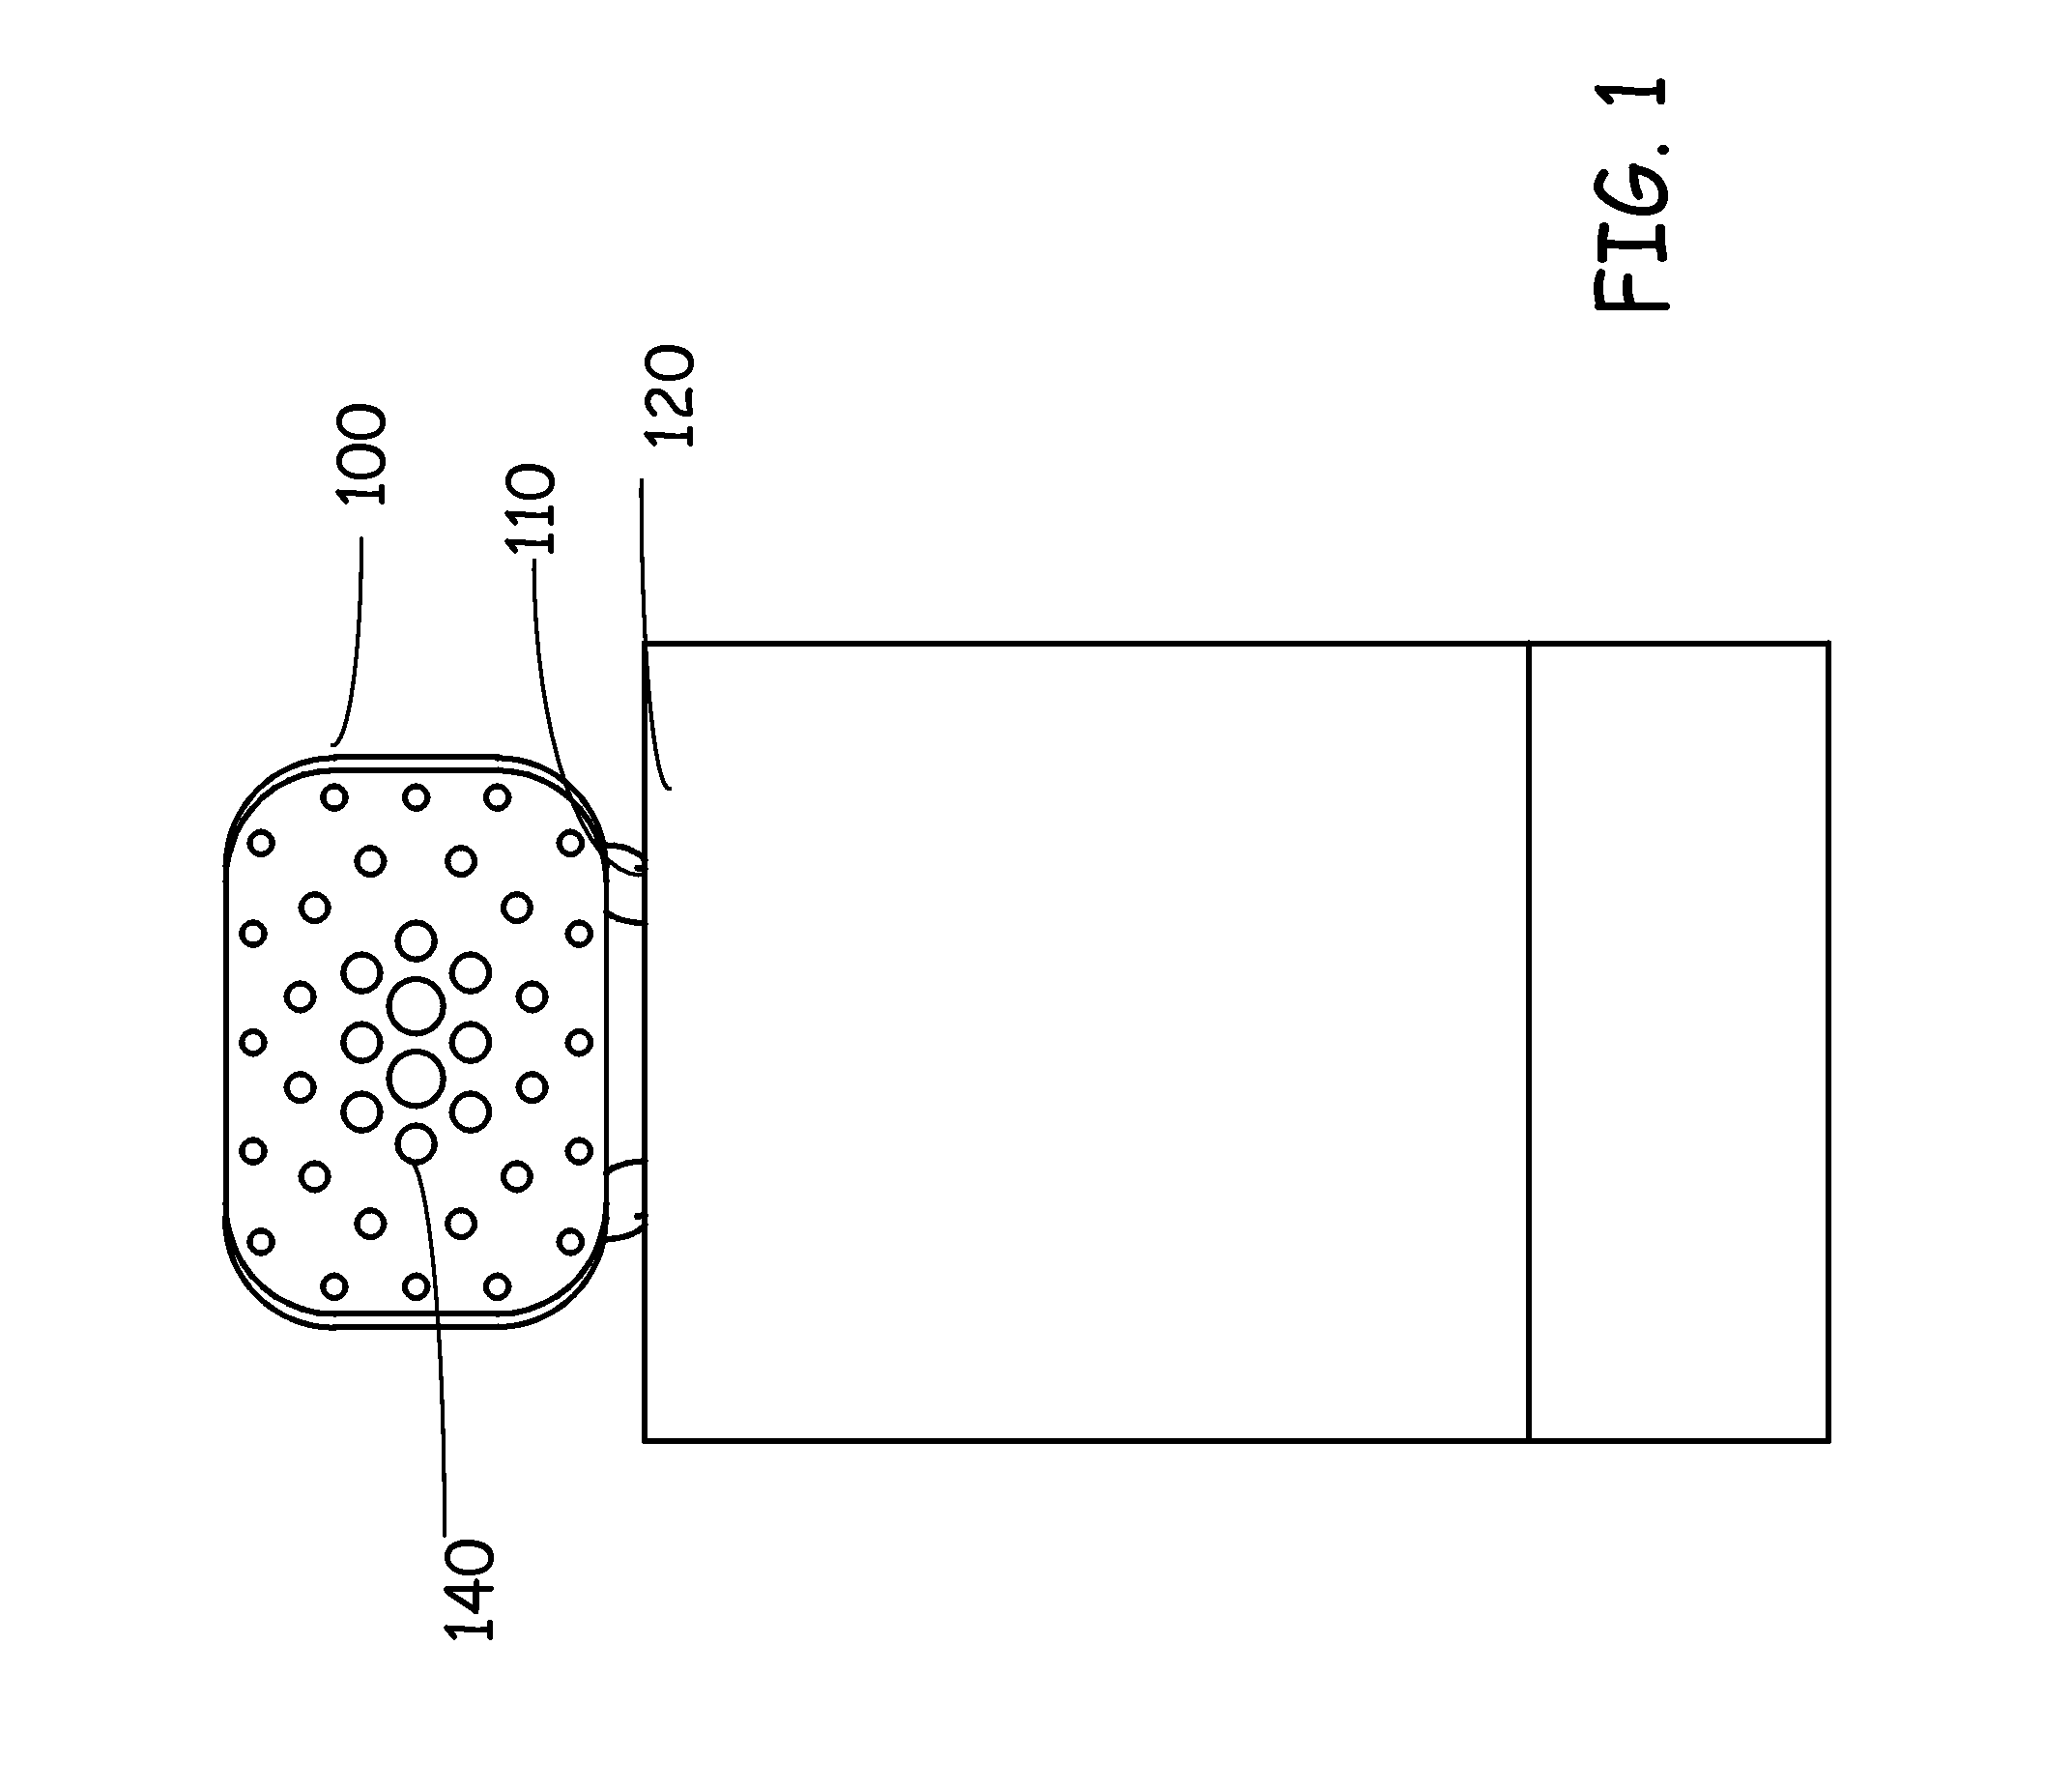 Vehicle seat apparatus for collision injury prevention